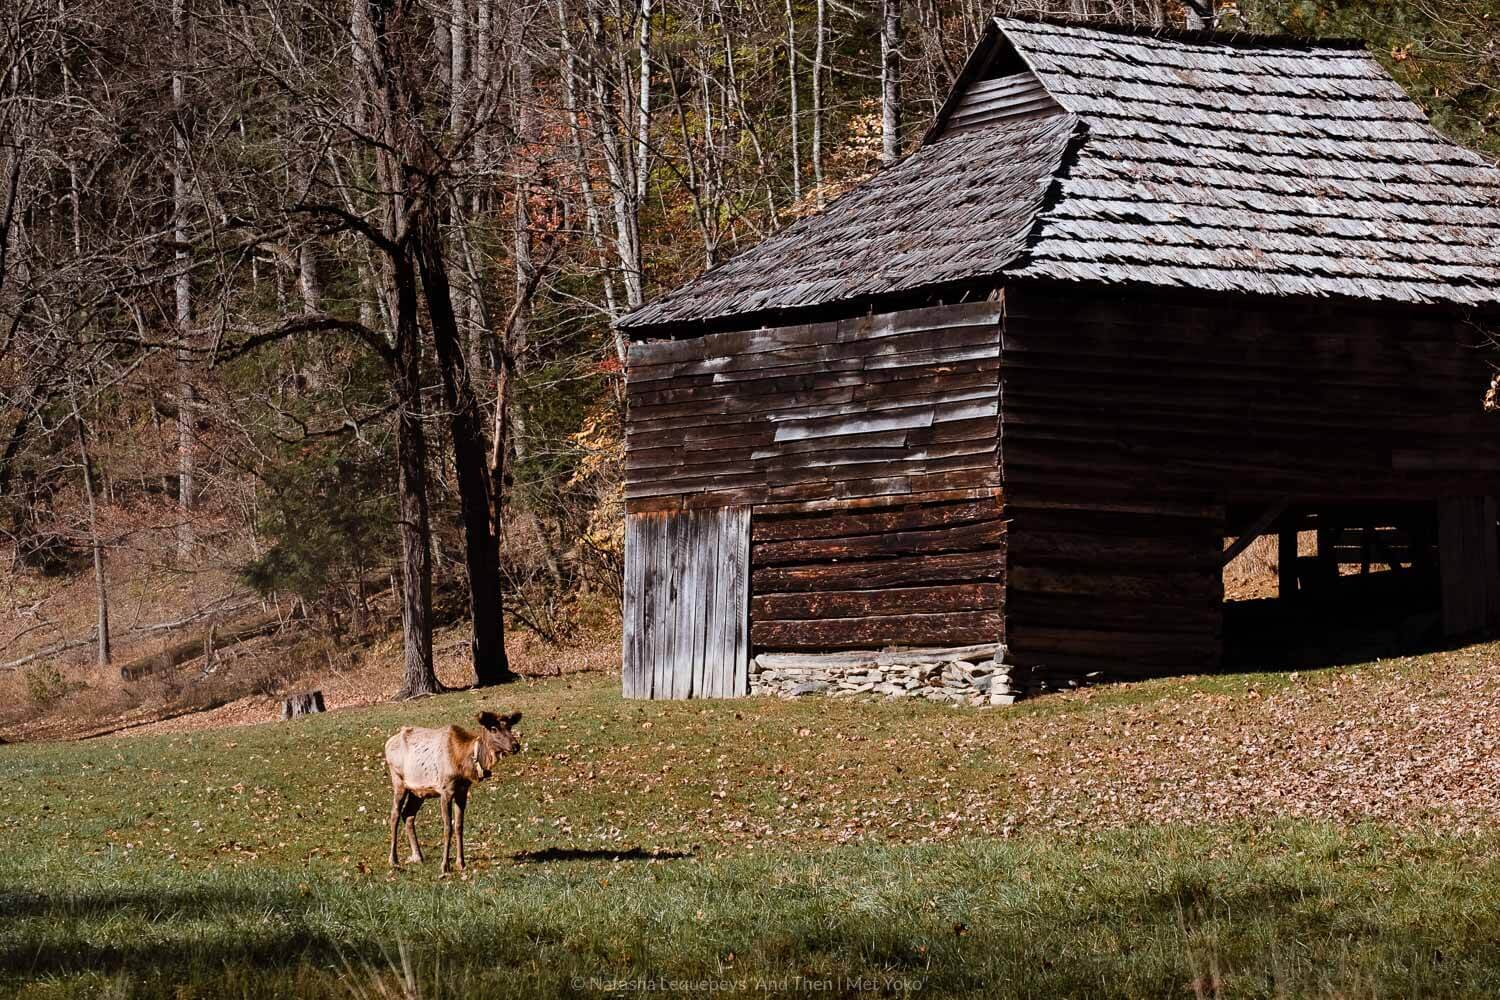 Elk in the Cataloochee Valley, The Great Smoky Mountains. Travel photography and guide by © Natasha Lequepeys for "And Then I Met Yoko". #smokymountains #usa #travelblog #travelphotography